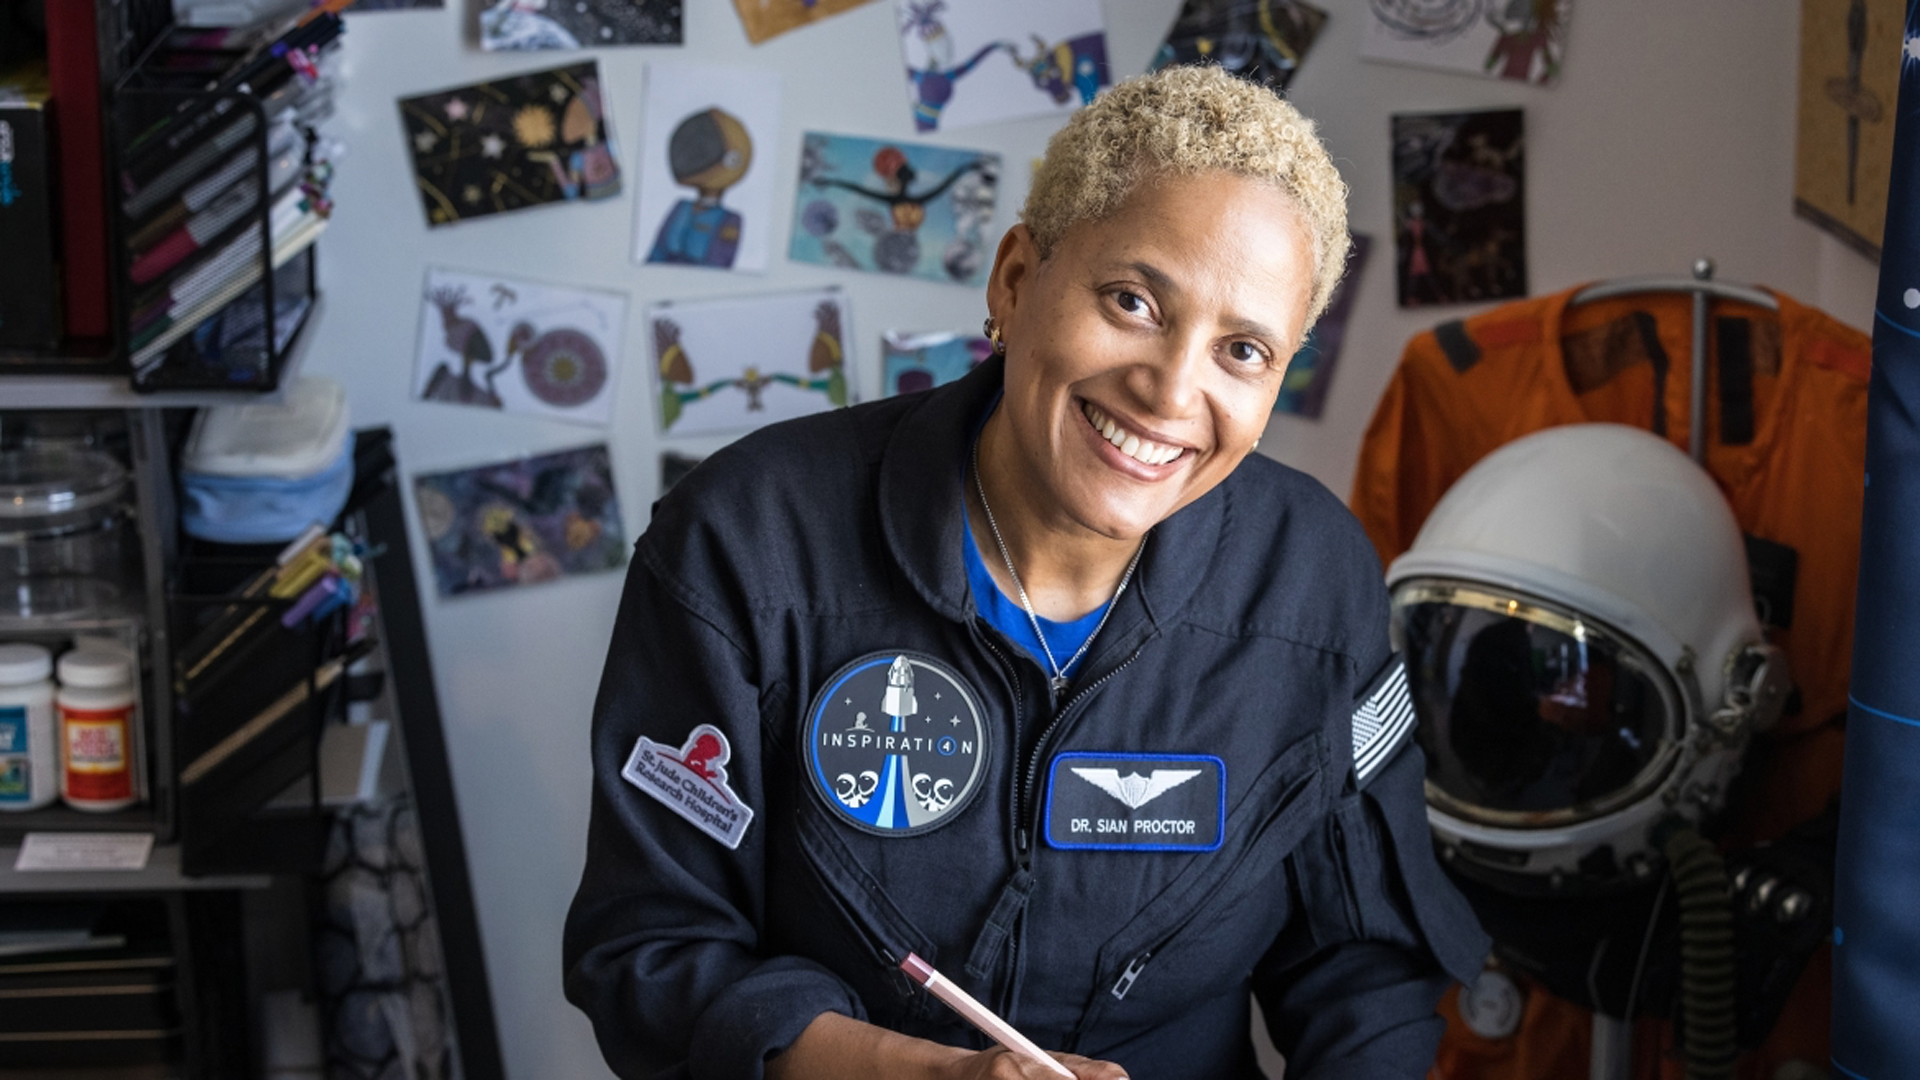 How Rejection Led Sian Proctor To Make History As The First Black Woman To Pilot A Spacecraft